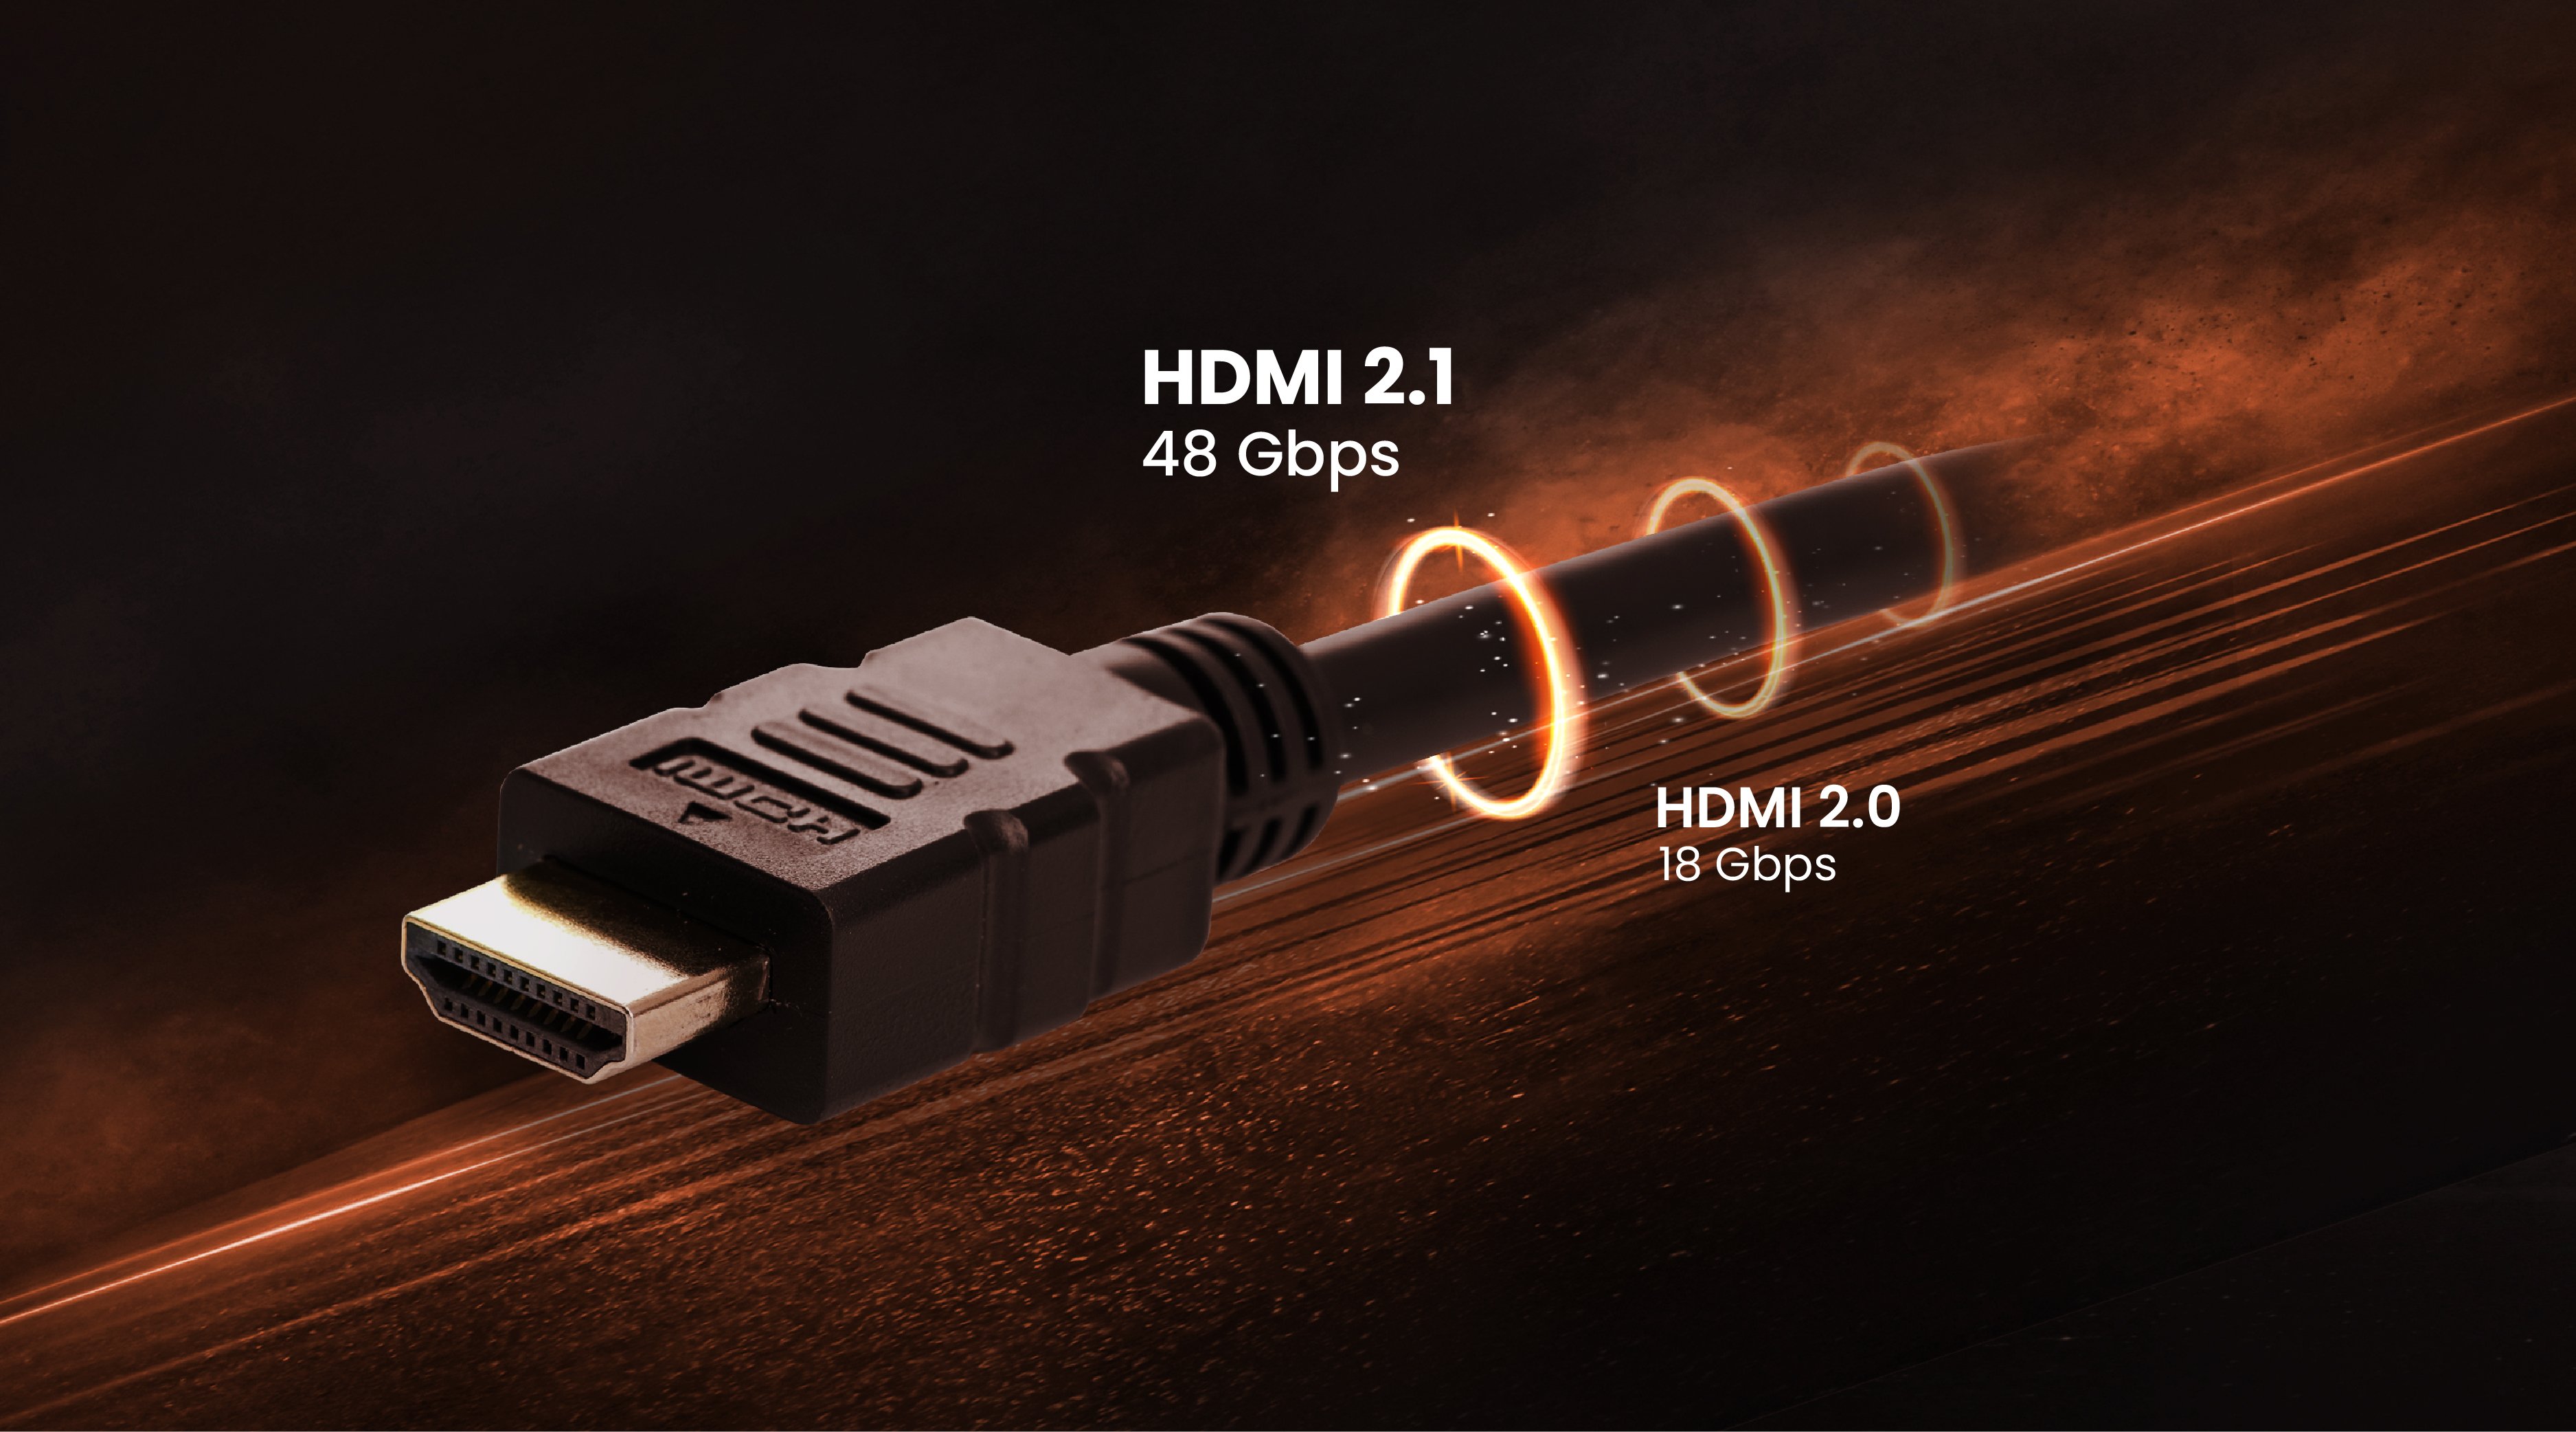 Symphony Henstilling frugthave When Do I Really Need HDMI 2.1 or Is HDMI 2.0 Enough? | BenQ US